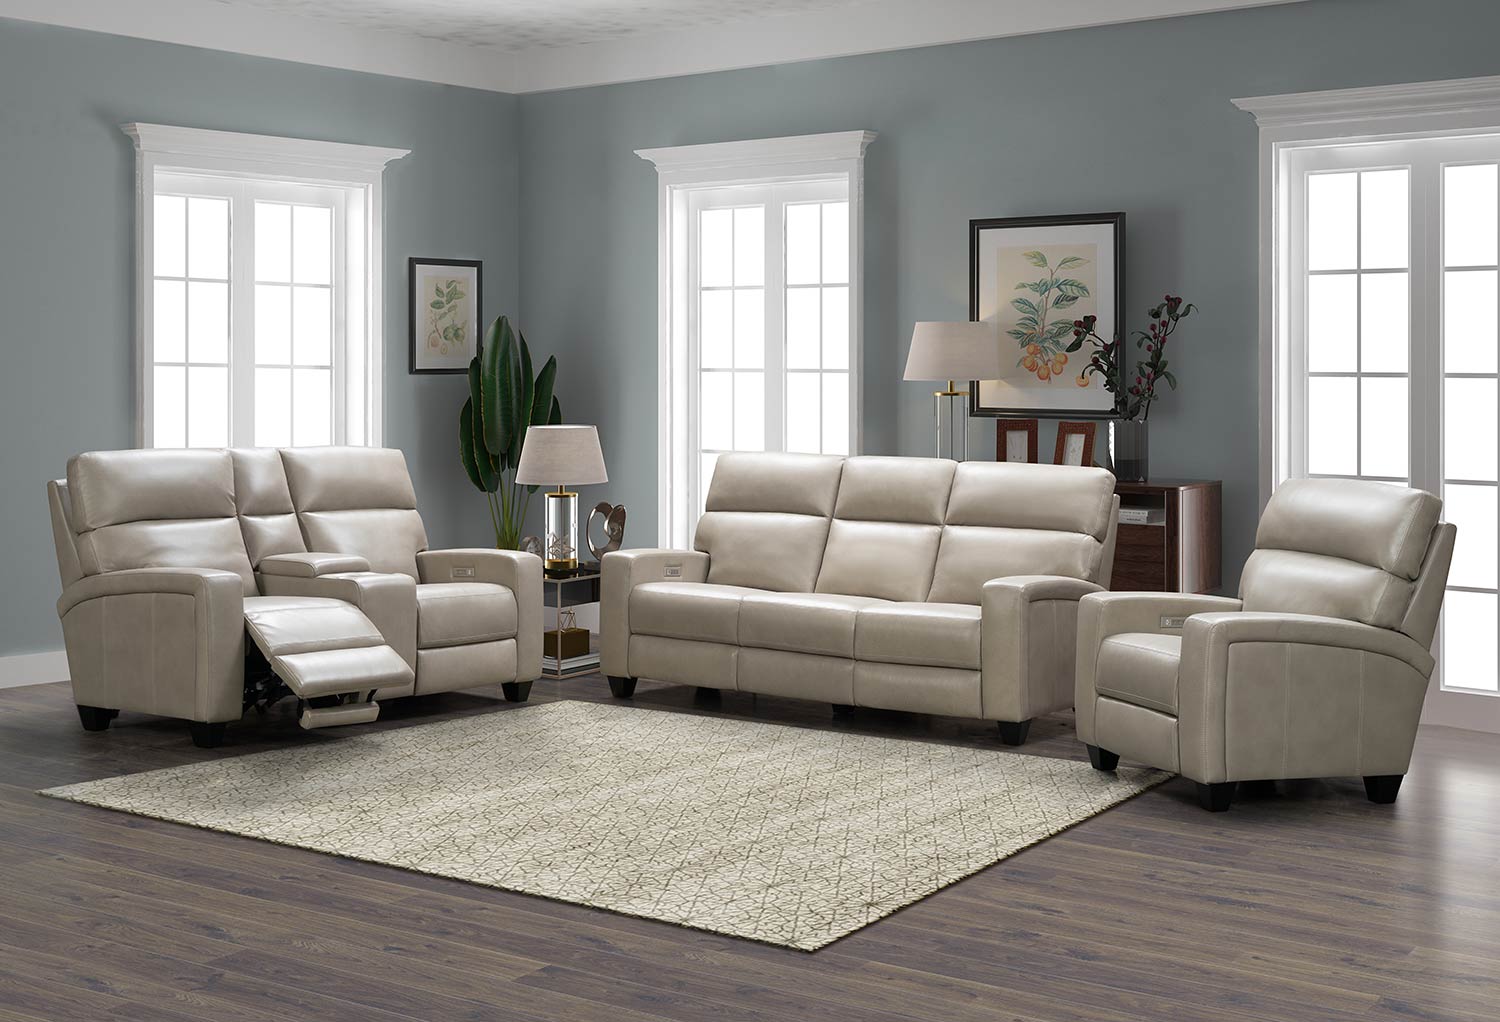 Barcalounger Marcello Power Reclining Sofa Set with Power Head Rests and Power Lumbar - Sergi Gray Beige/Leather Match